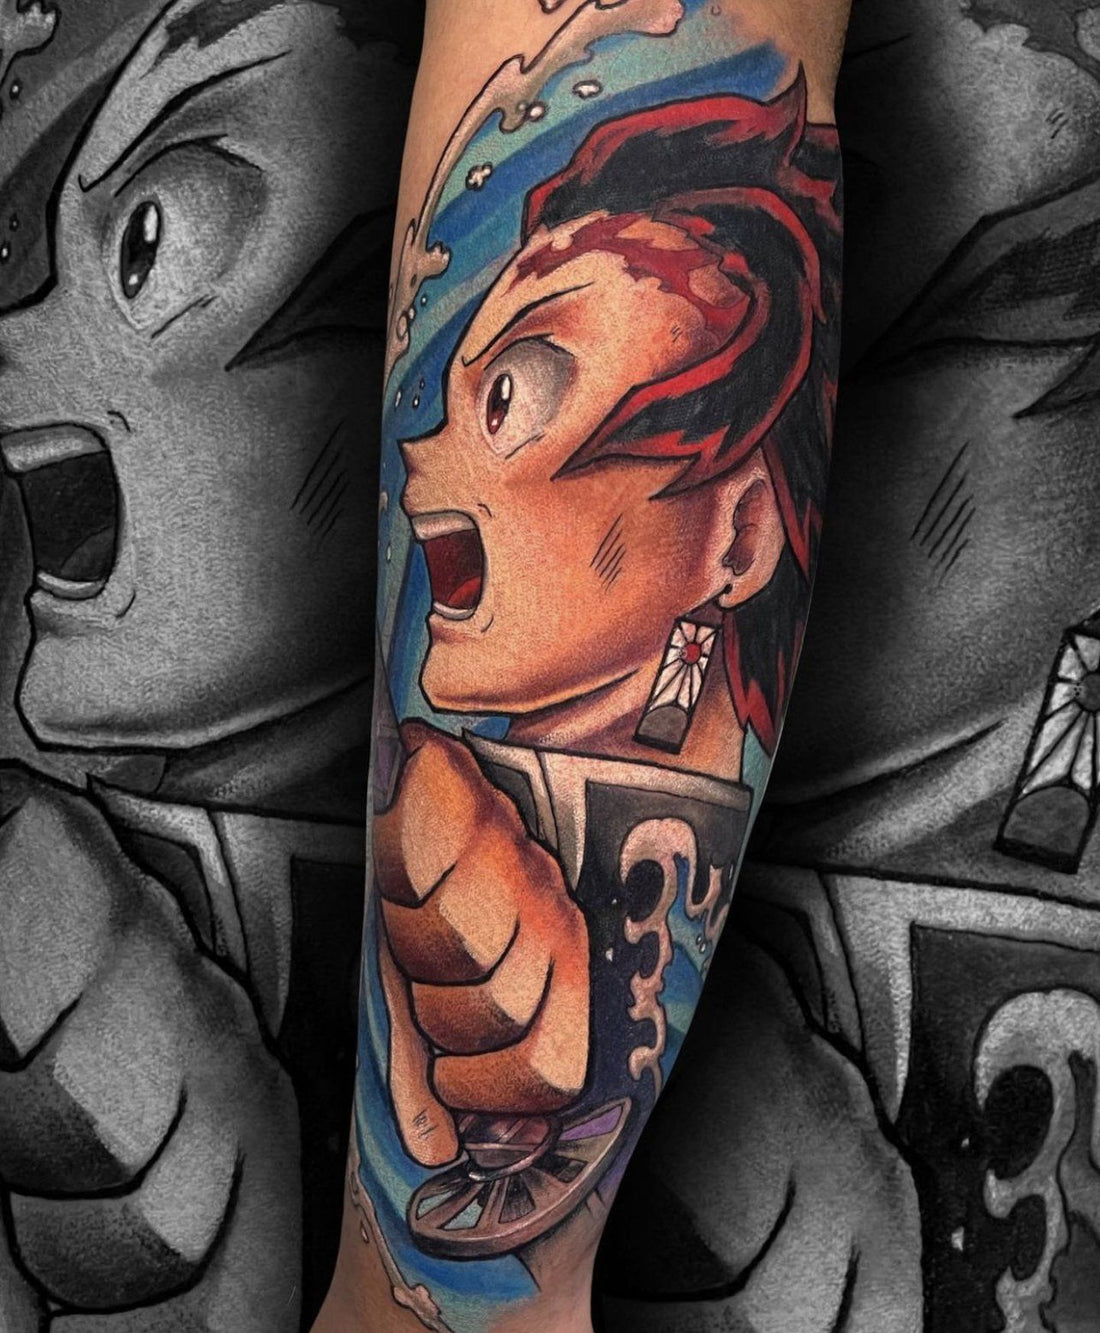 ANIME TATTOOS: ALL YOU’VE EVER WANTED TO KNOW